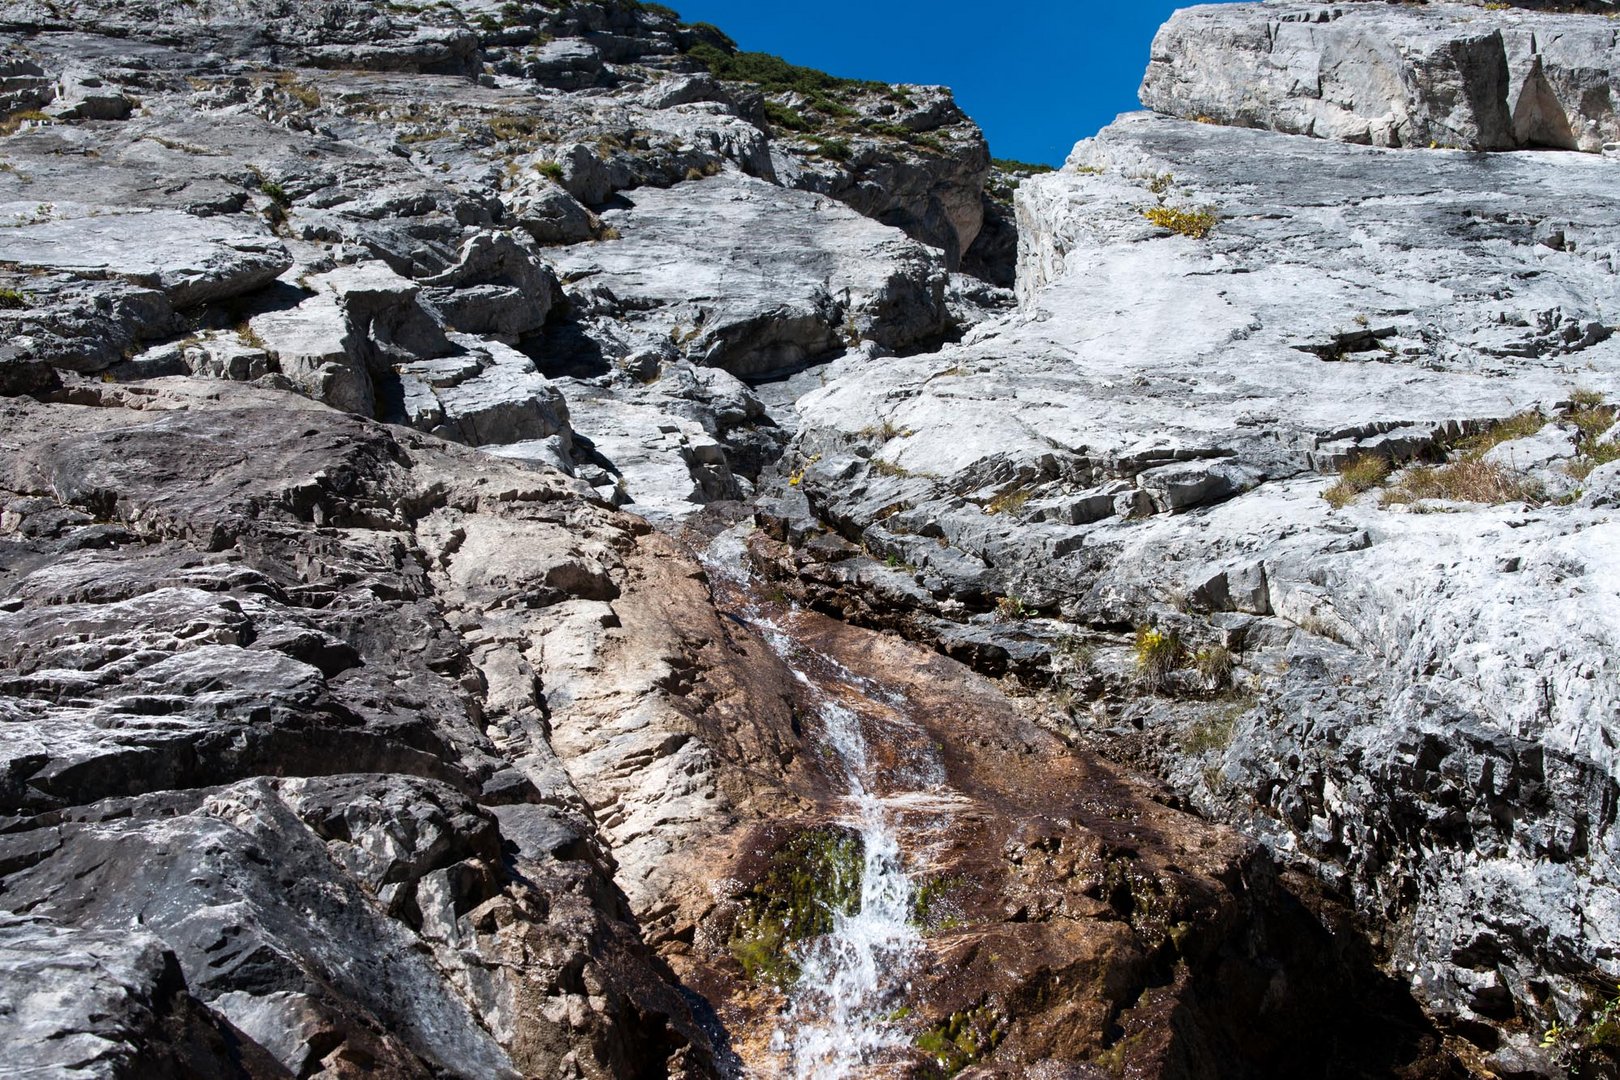 A special waterfall in the Karwendel